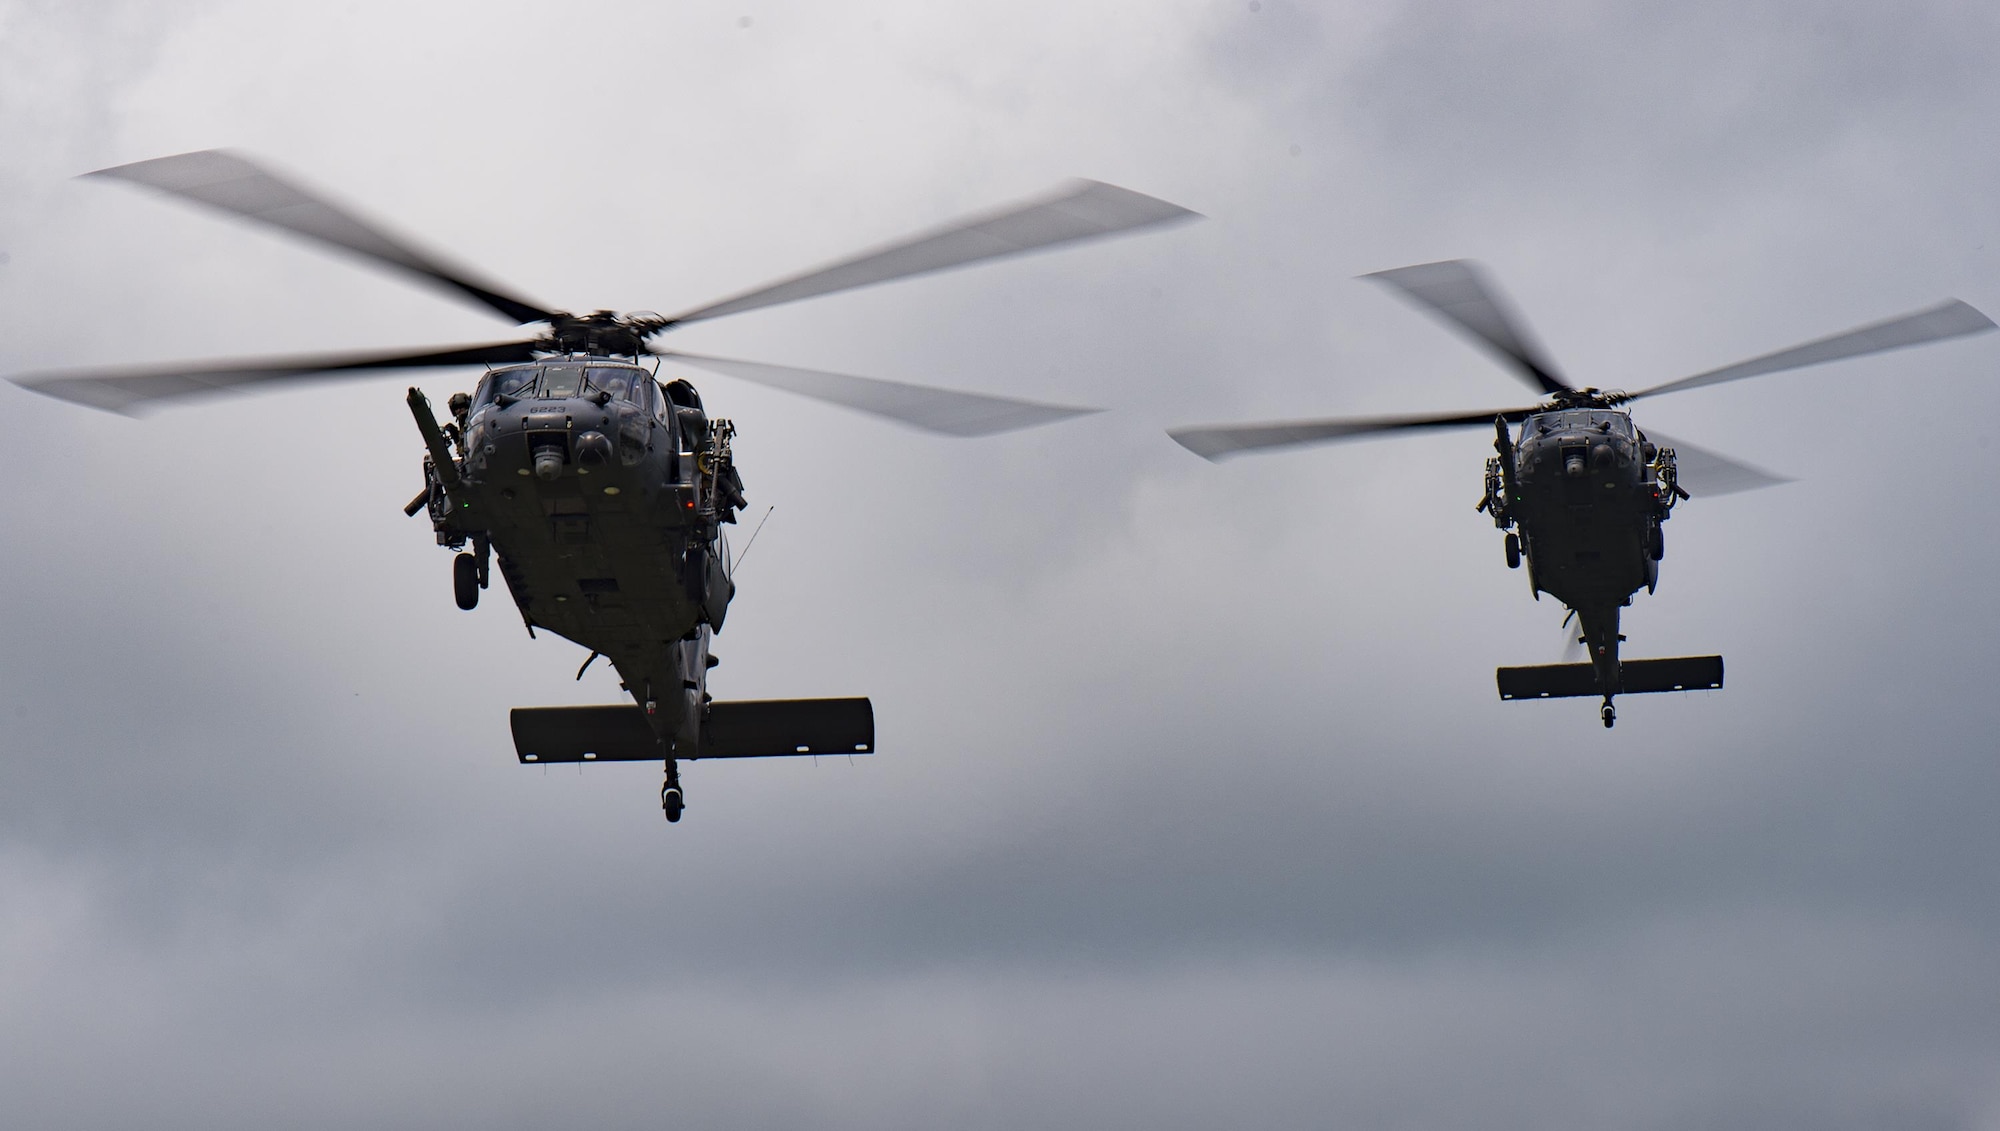 HH-60G Pave Hawks fly over Grand Bay Bombing and Gunnery Range at Moody Air Force Base, Ga., May 20, 2016. Multiple U.S. Air Force aircraft within Air Combat Command conducted joint aerial training showcasing the aircraft’s tactical air and ground maneuvers, as well as its weapons capabilities. (U.S. Air Force photo by Tech. Sgt. Zachary Wolf/Released)